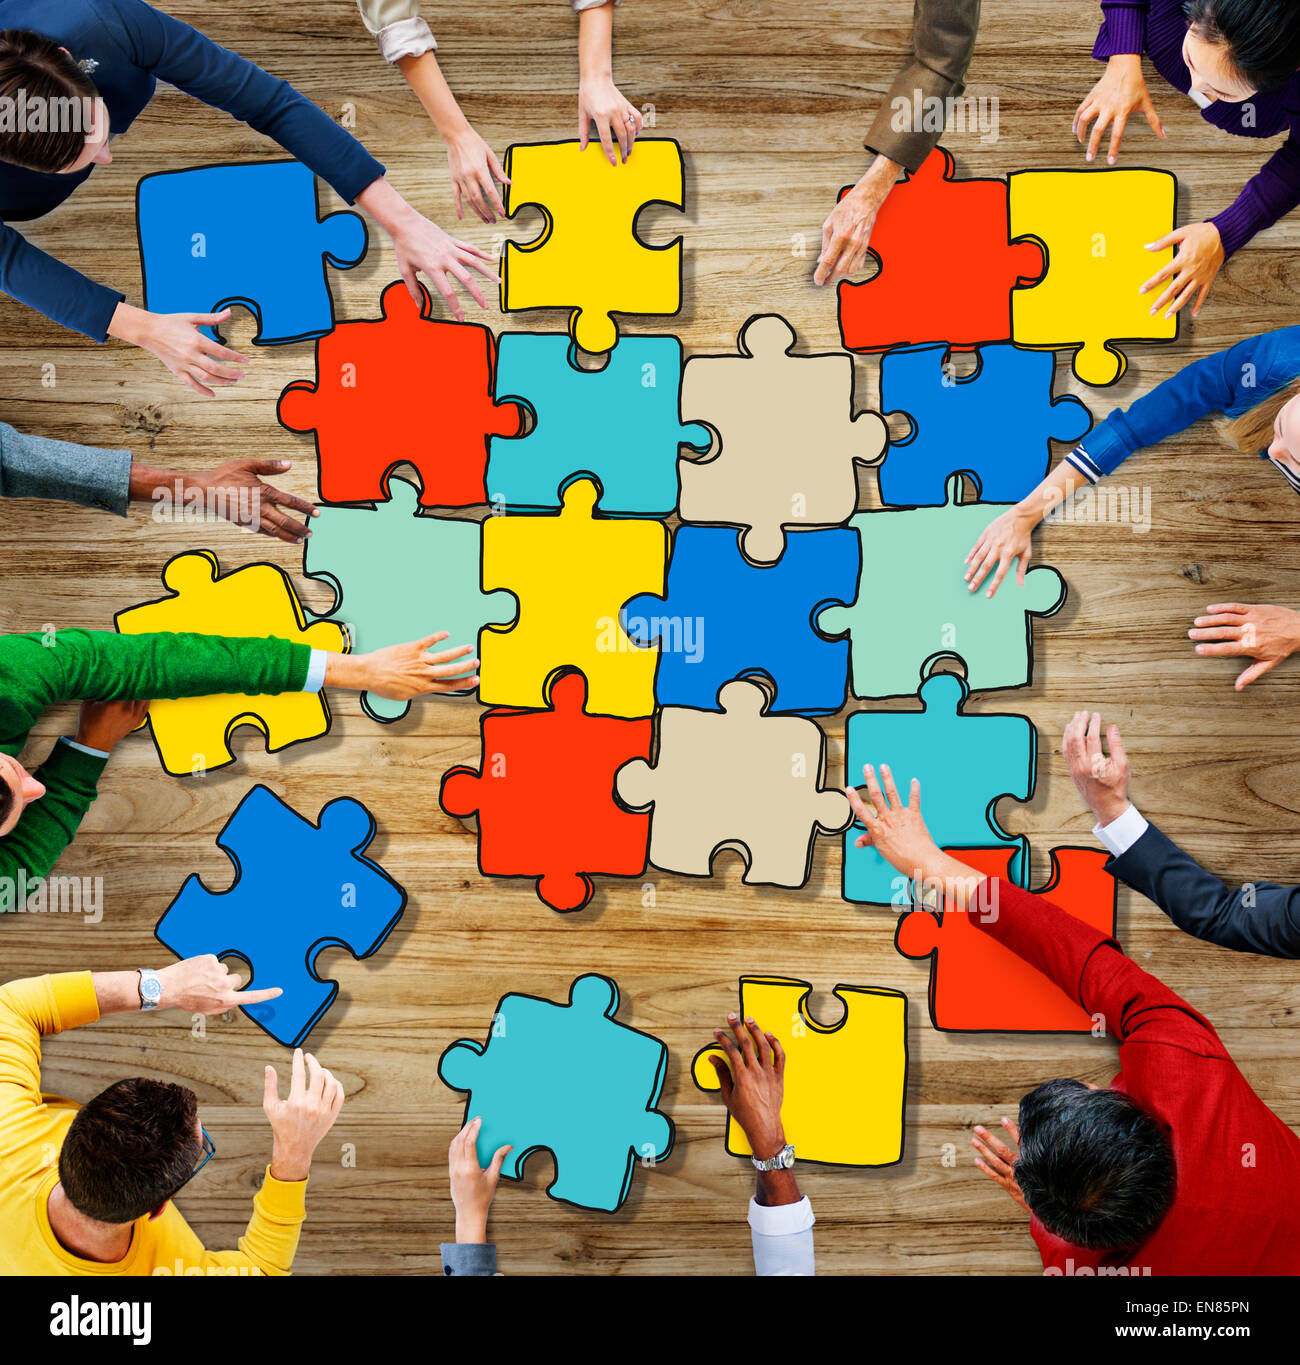 Group of Diverse People with Jigsaw Puzzle Pieces Concept Stock Photo